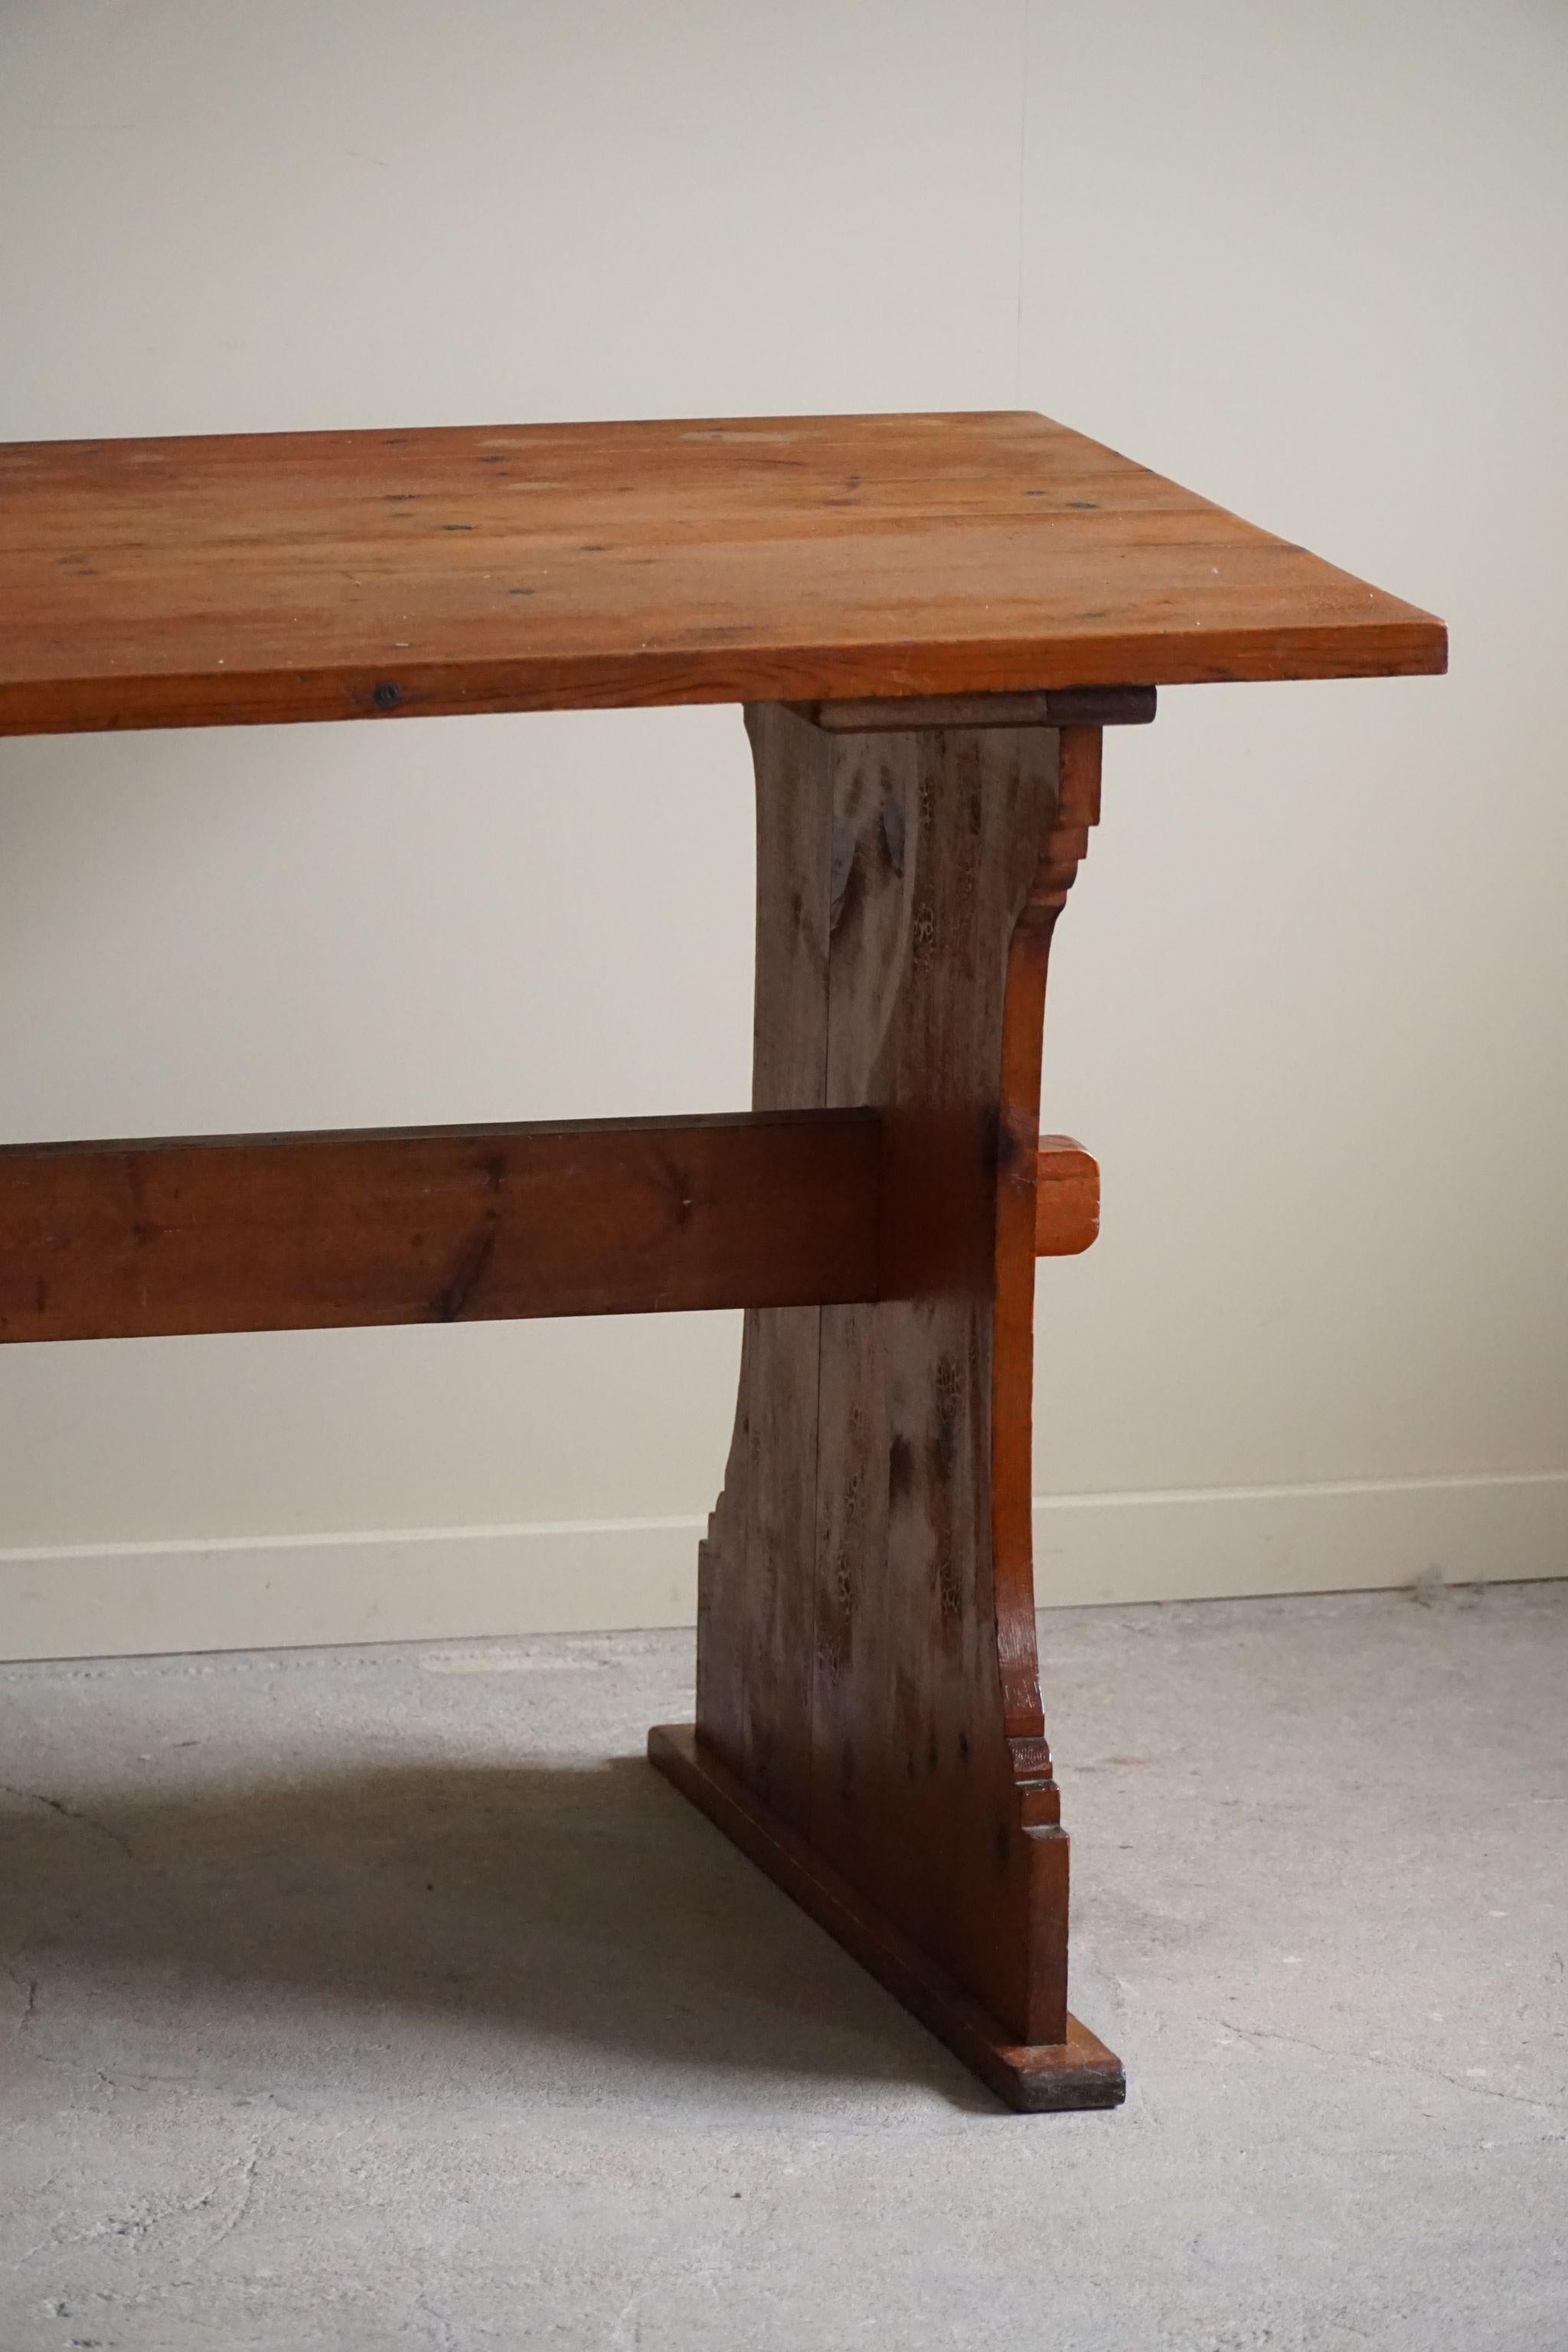 Swedish Modern Pine Desk, Axel Einar Hjorth Style, Made in the 1940s For Sale 6